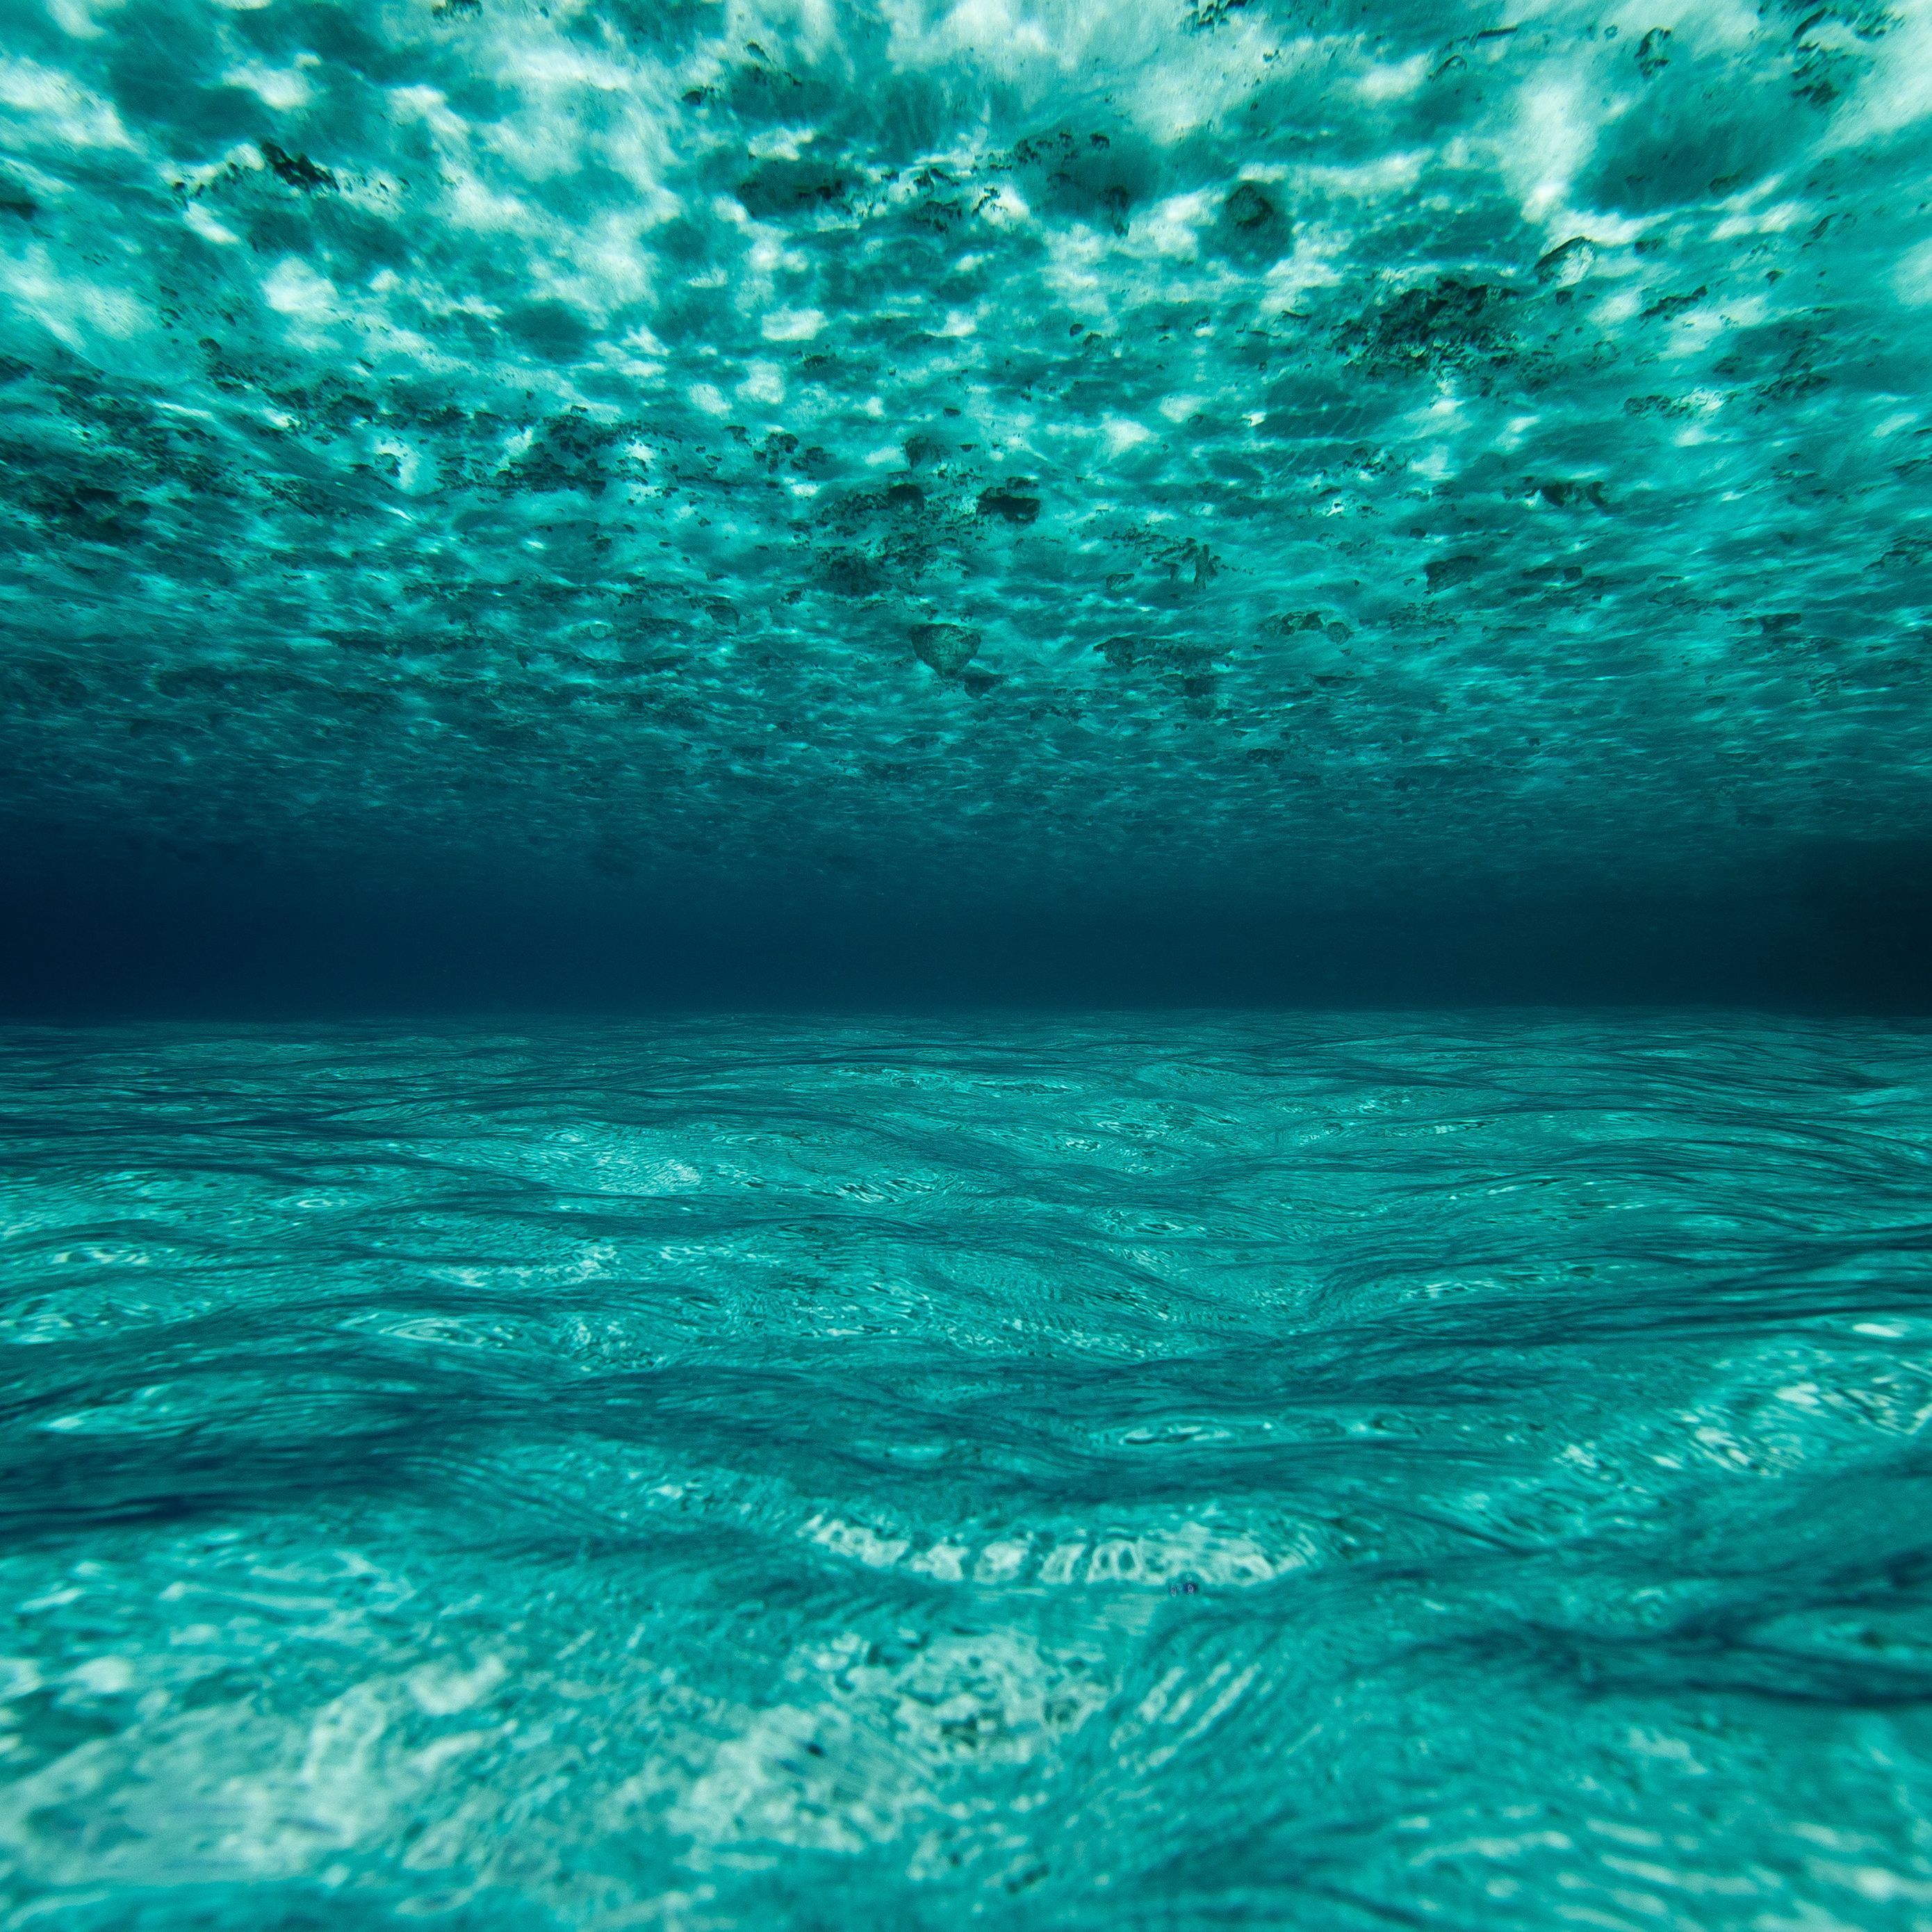 A photo of the ocean floor with blue water and a white sea foam on top. - Underwater